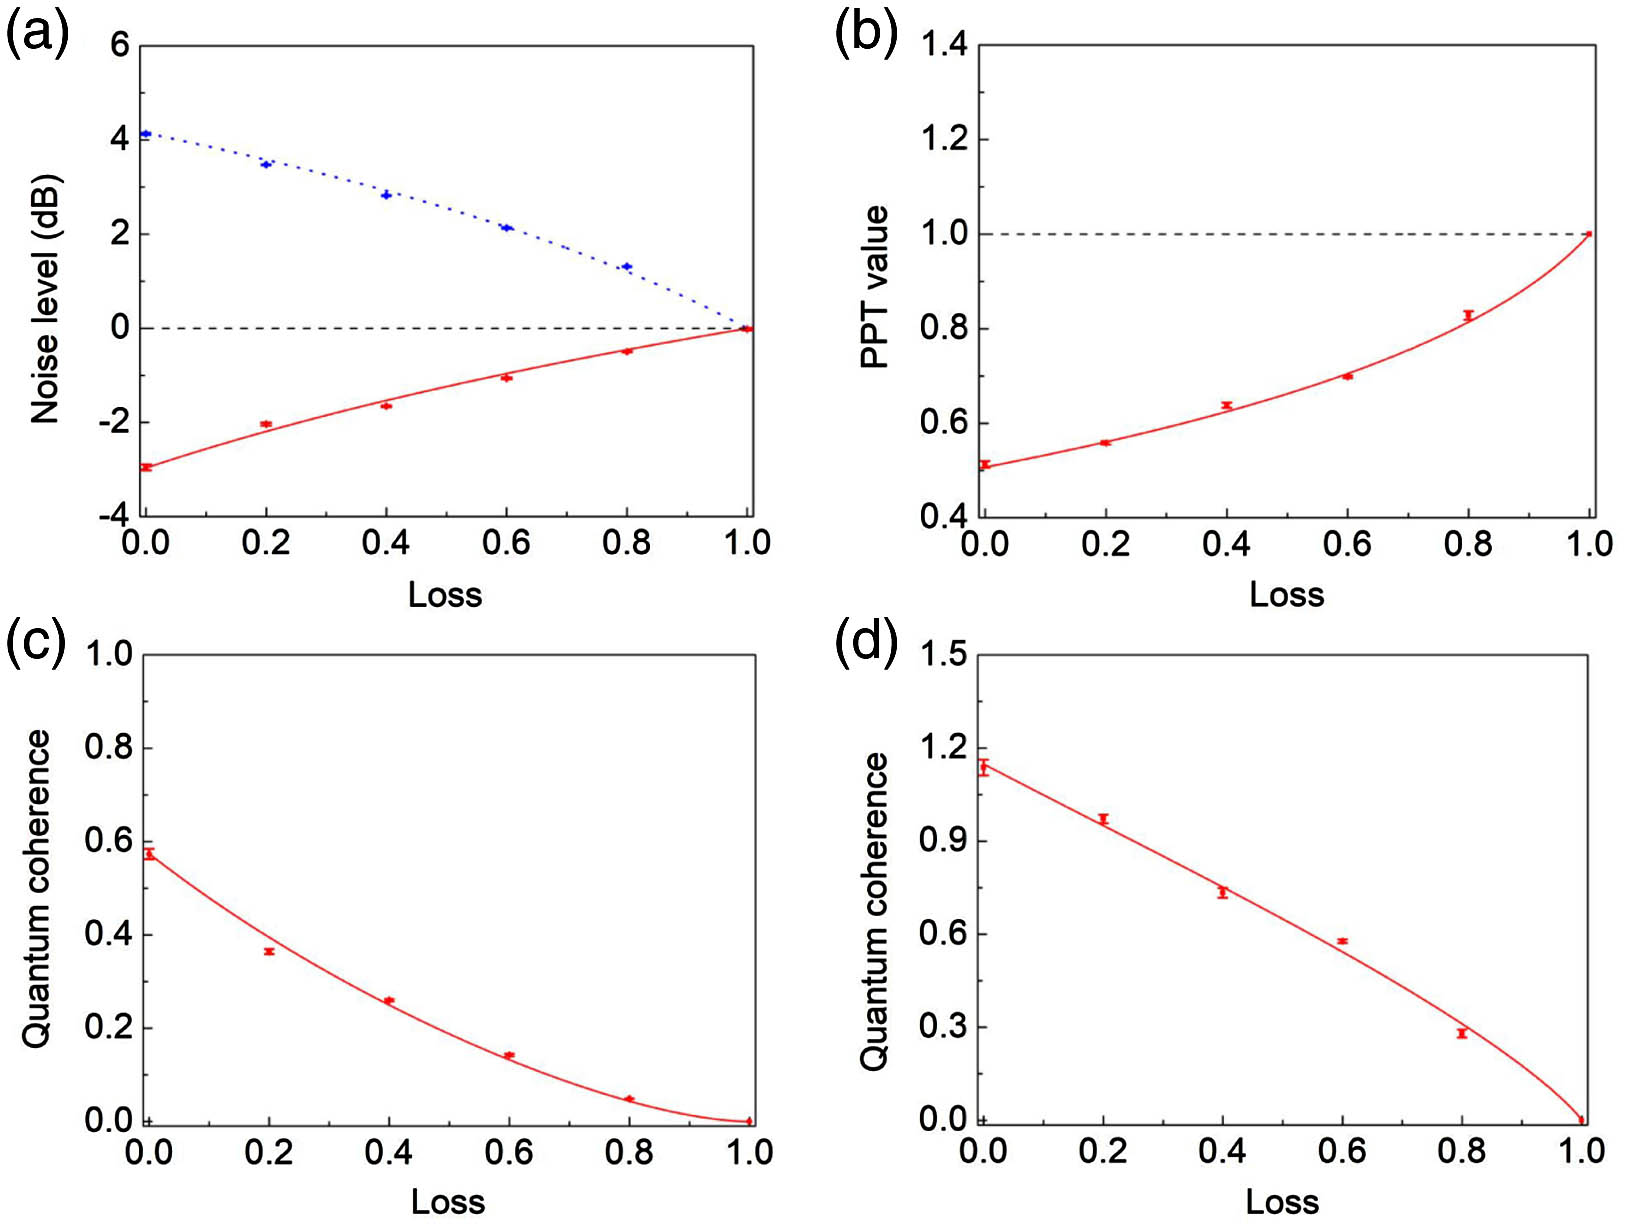 Experimental results in a lossy channel. (a) Dependence of squeezing (red solid line) and antisqueezing (blue dotted line) of the squeezed state on the loss. The dashed line is the shot noise limit (SNL). (b) Dependence of PPT value of the EPR entangled state on the loss. The dashed line is the boundary of the entangled and separable states. (c) and (d) Dependence of the quantum coherence of the squeezed state and the EPR entangled state on the loss, respectively. The initial squeezed and antisqueezed noise levels are −2.95 dB and 4.15 dB, respectively. The error bars represent one standard deviation and are obtained based on the statistics of the data.